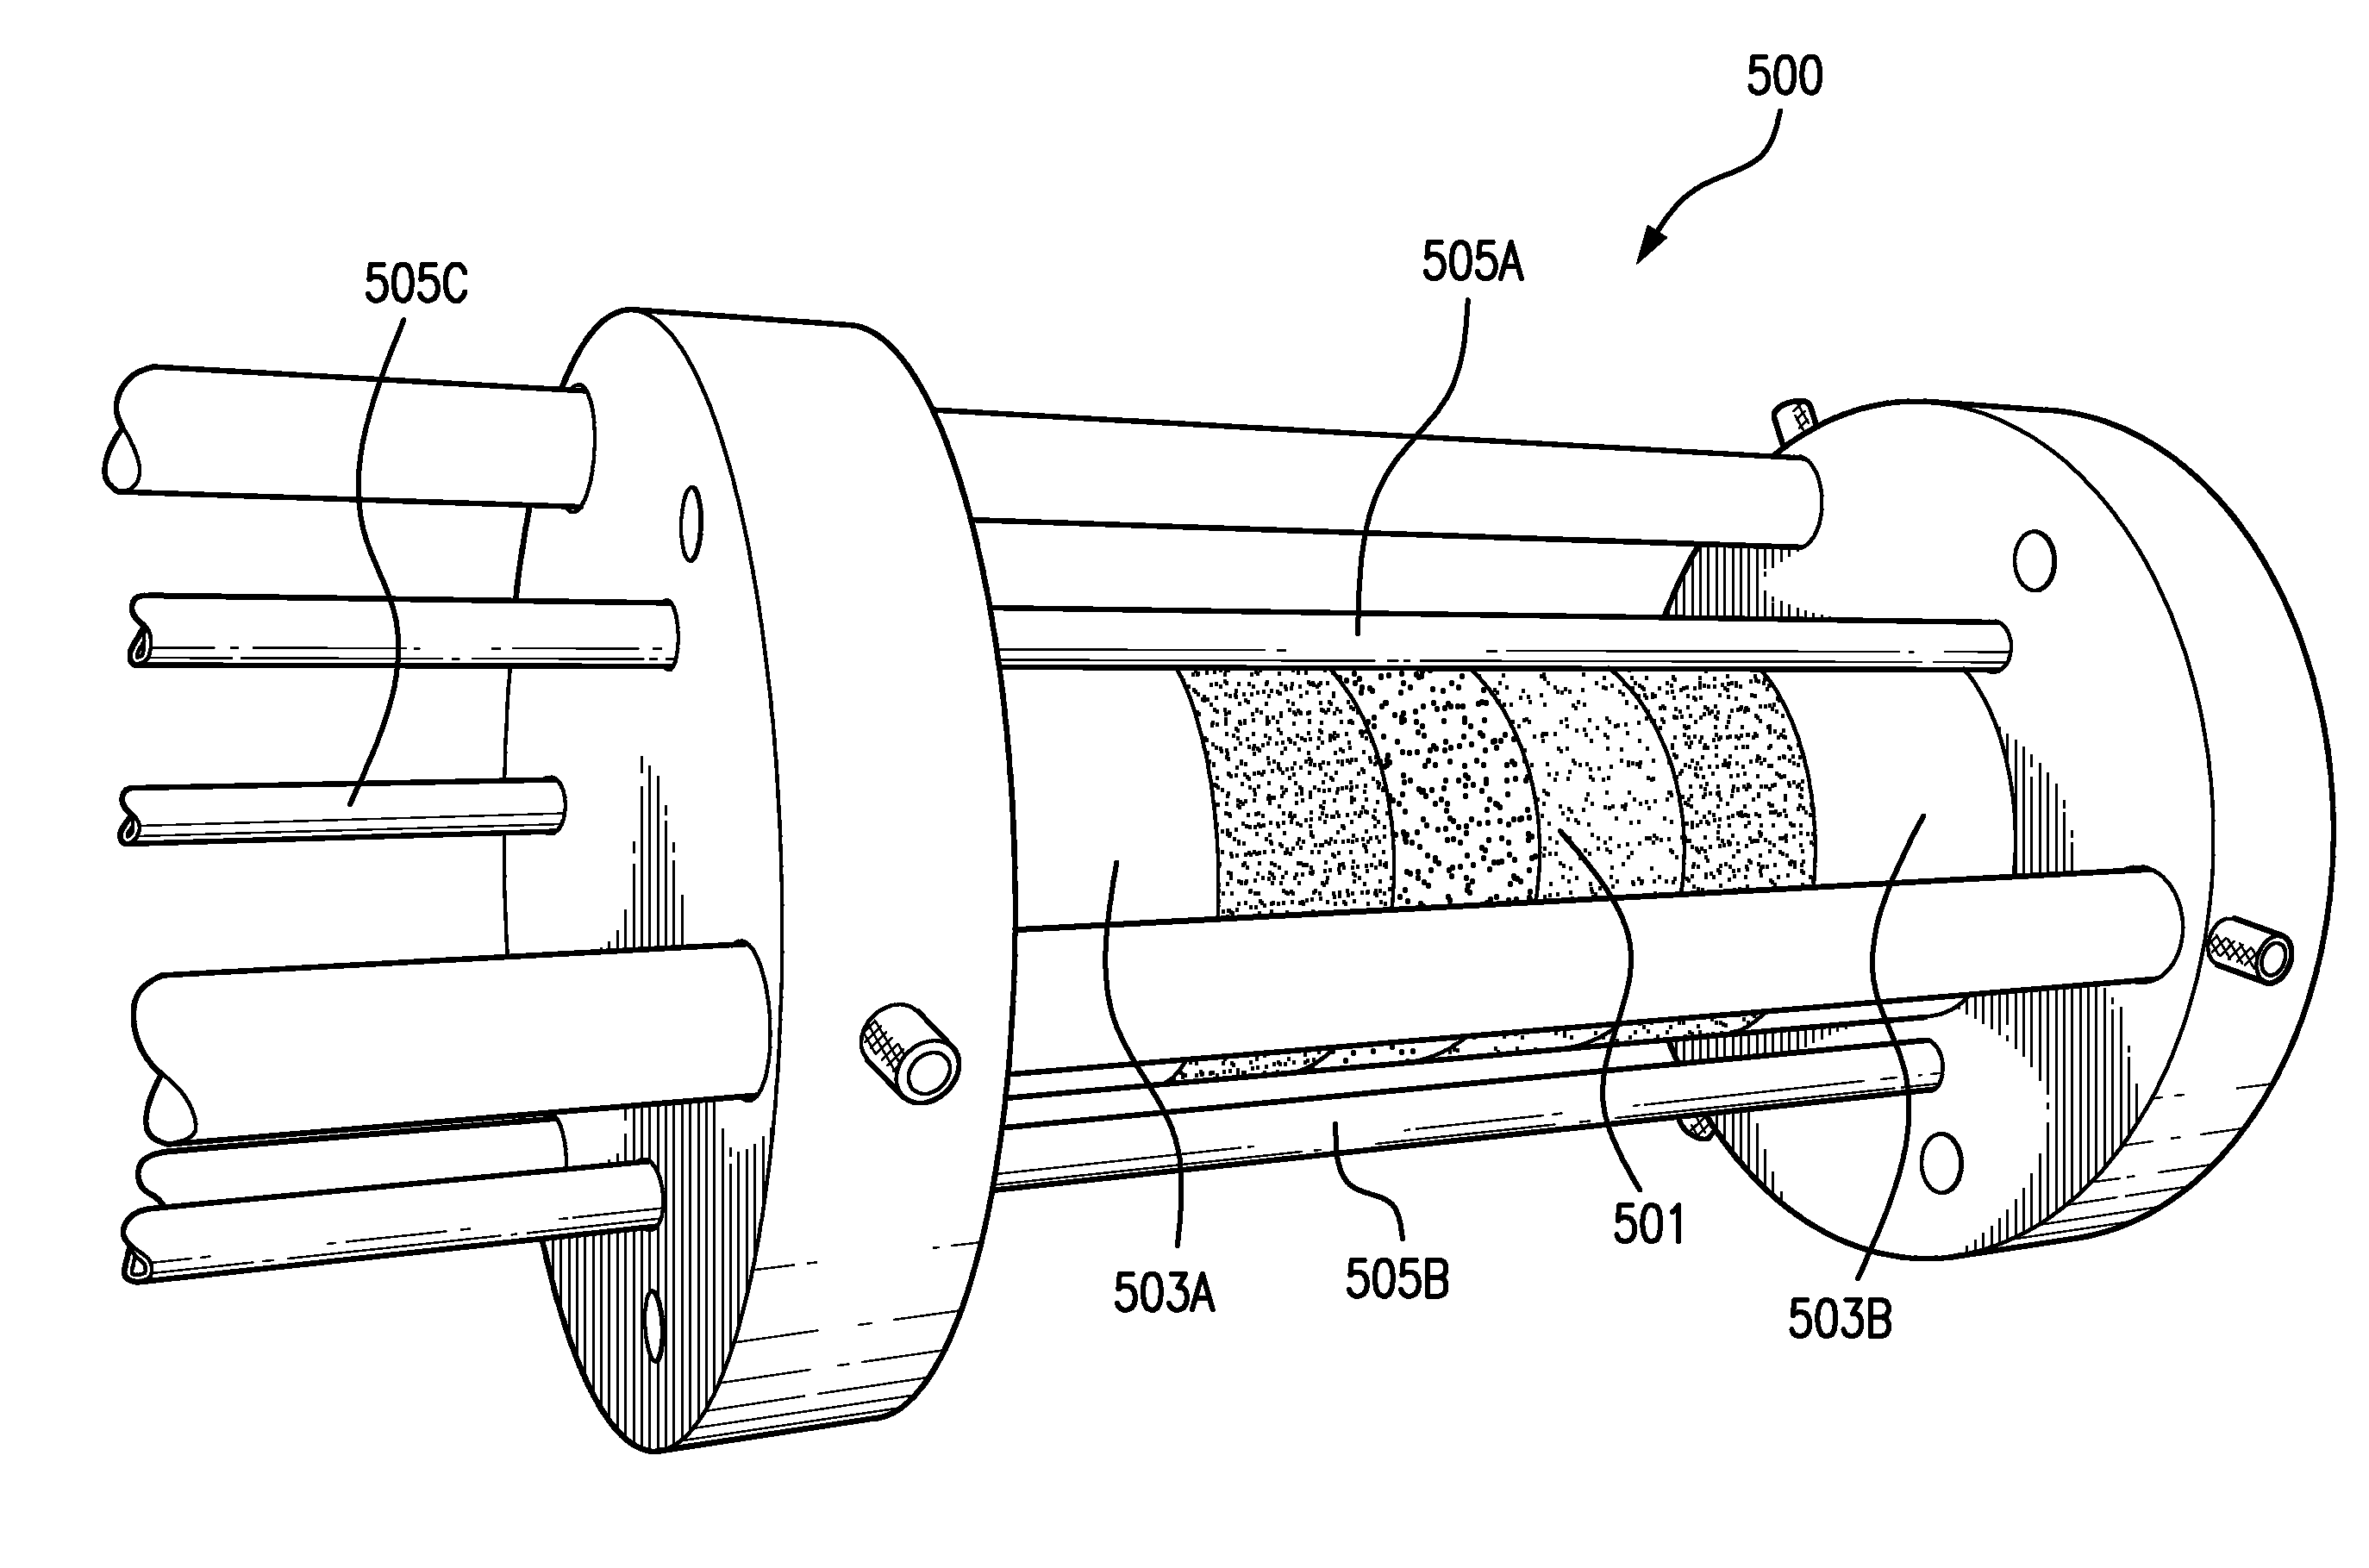 Method And System For Multi-Energy Computer Tomographic Cuttings Analysis